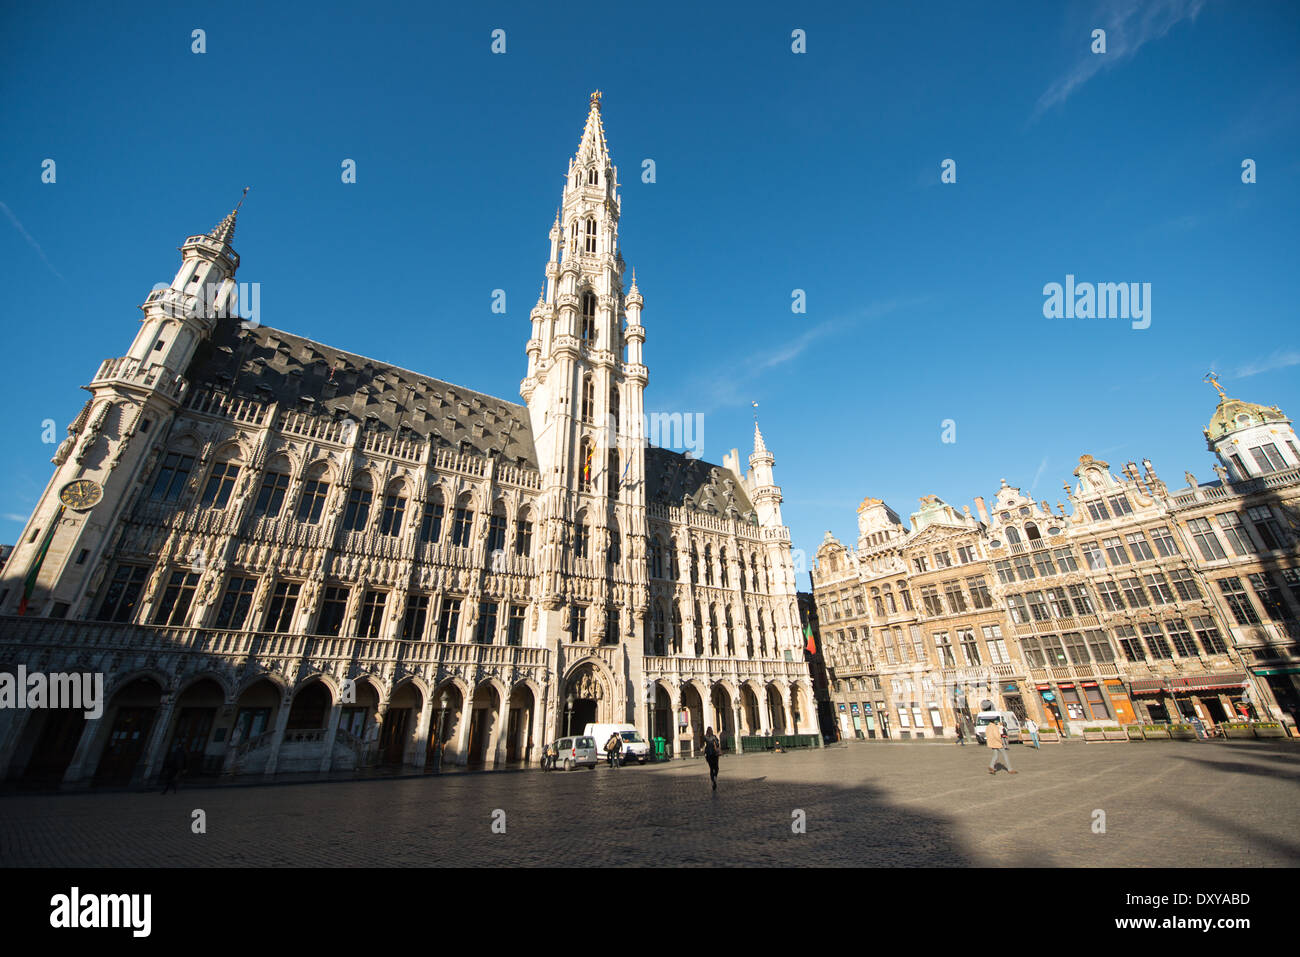 on Grand Place (La Grand-Place), a UNESCO World Heritage Site in central Brussels, Belgium. Lined with ornate, historic buildings, the cobblestone square is the primary tourist attraction in Brussels. Stock Photo